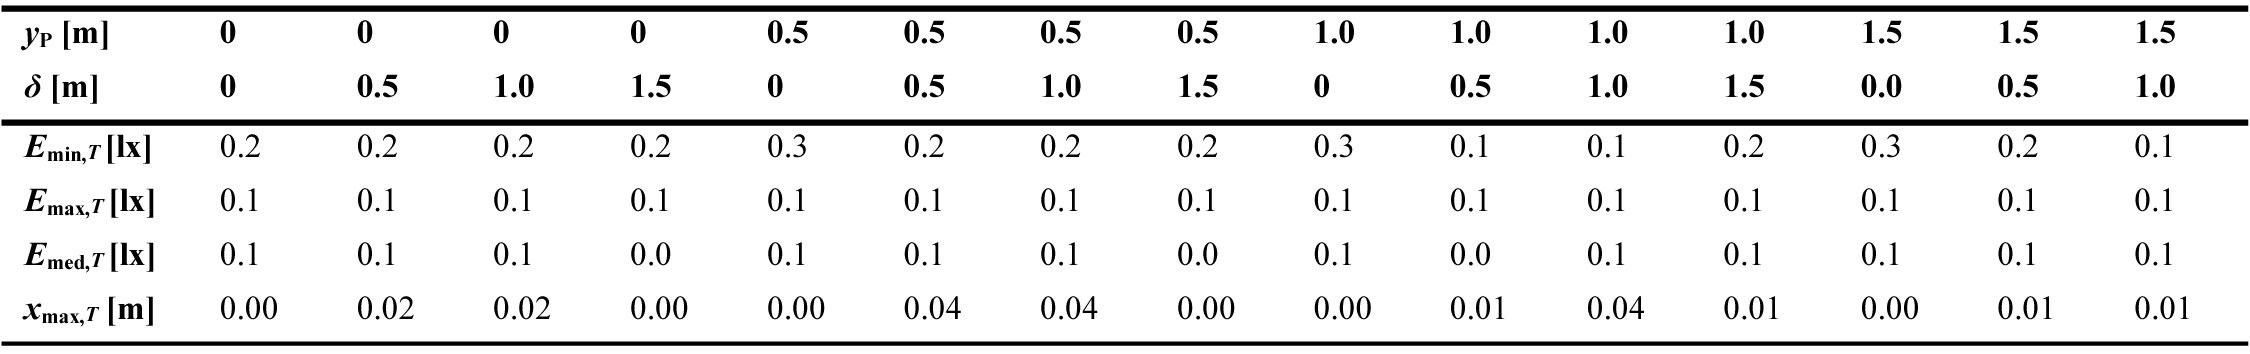 Absolute differences between the largest and smallest values of Emin,T, Emax,T, Emed,T, and xmax,T obtained with the four approaches in the configuration with BZ5 LID type.